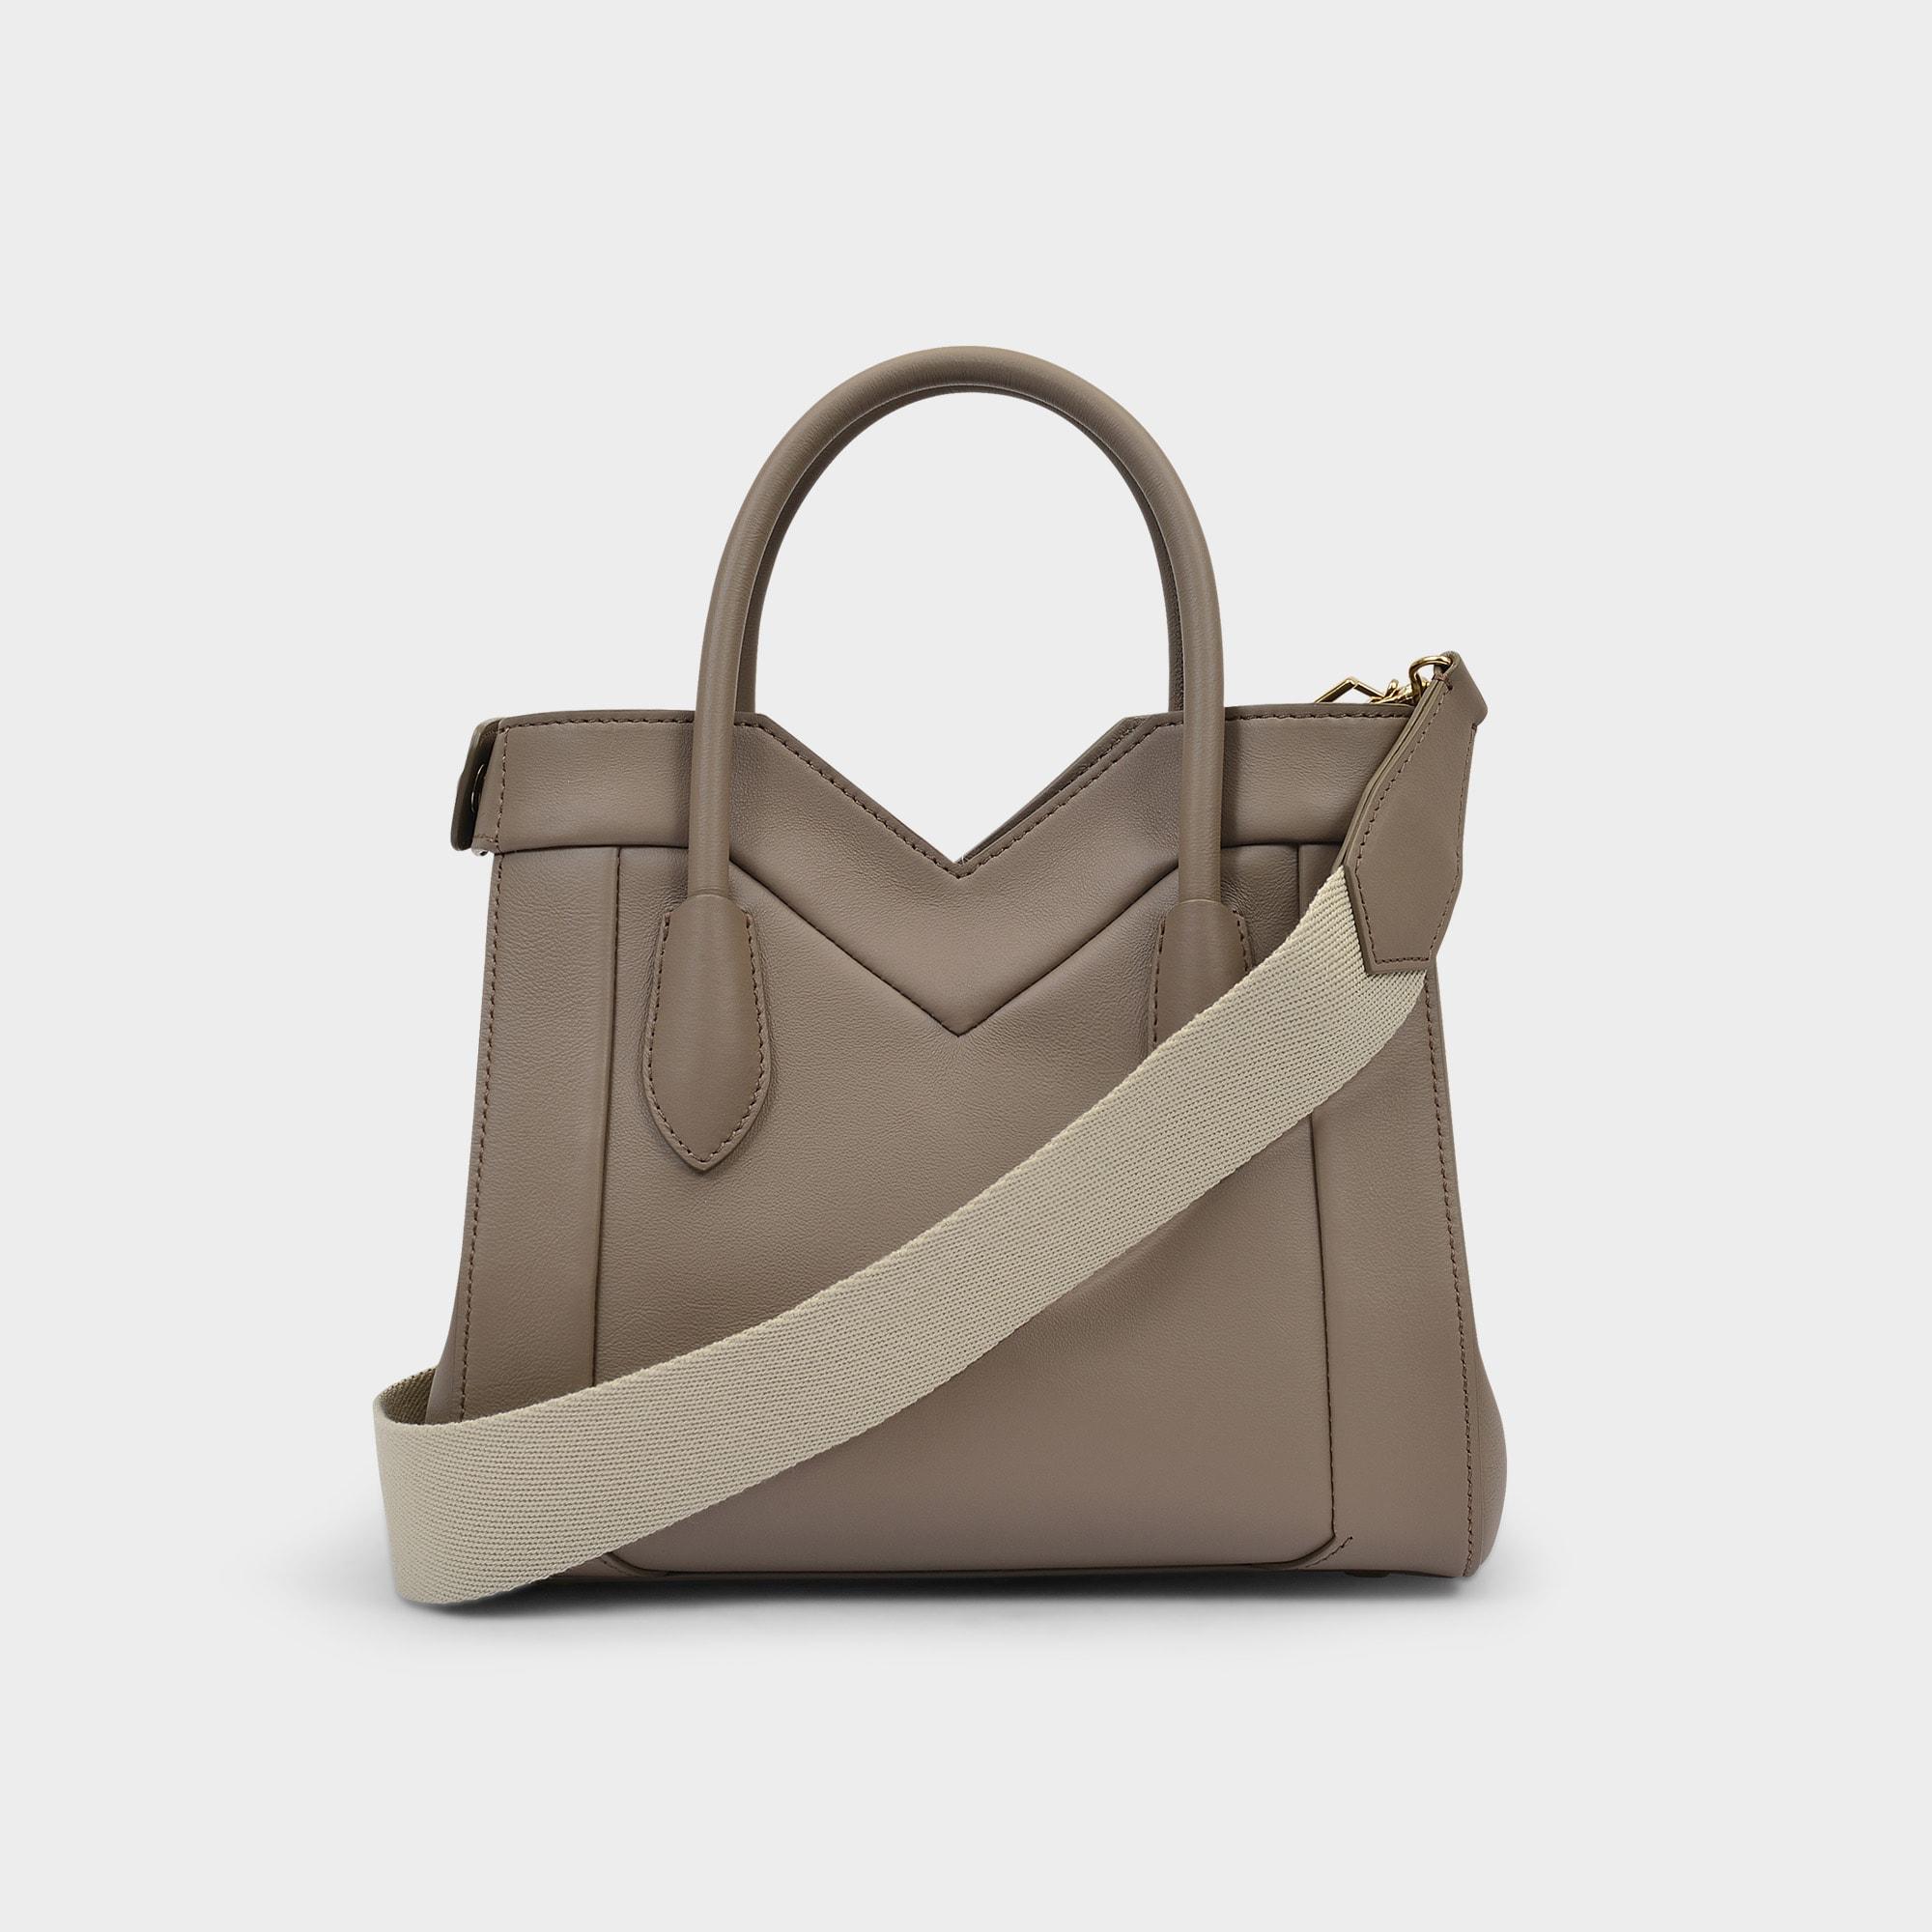 Max Mara Madame Small Bag In Taupe Leather in Beige (Natural) - Lyst